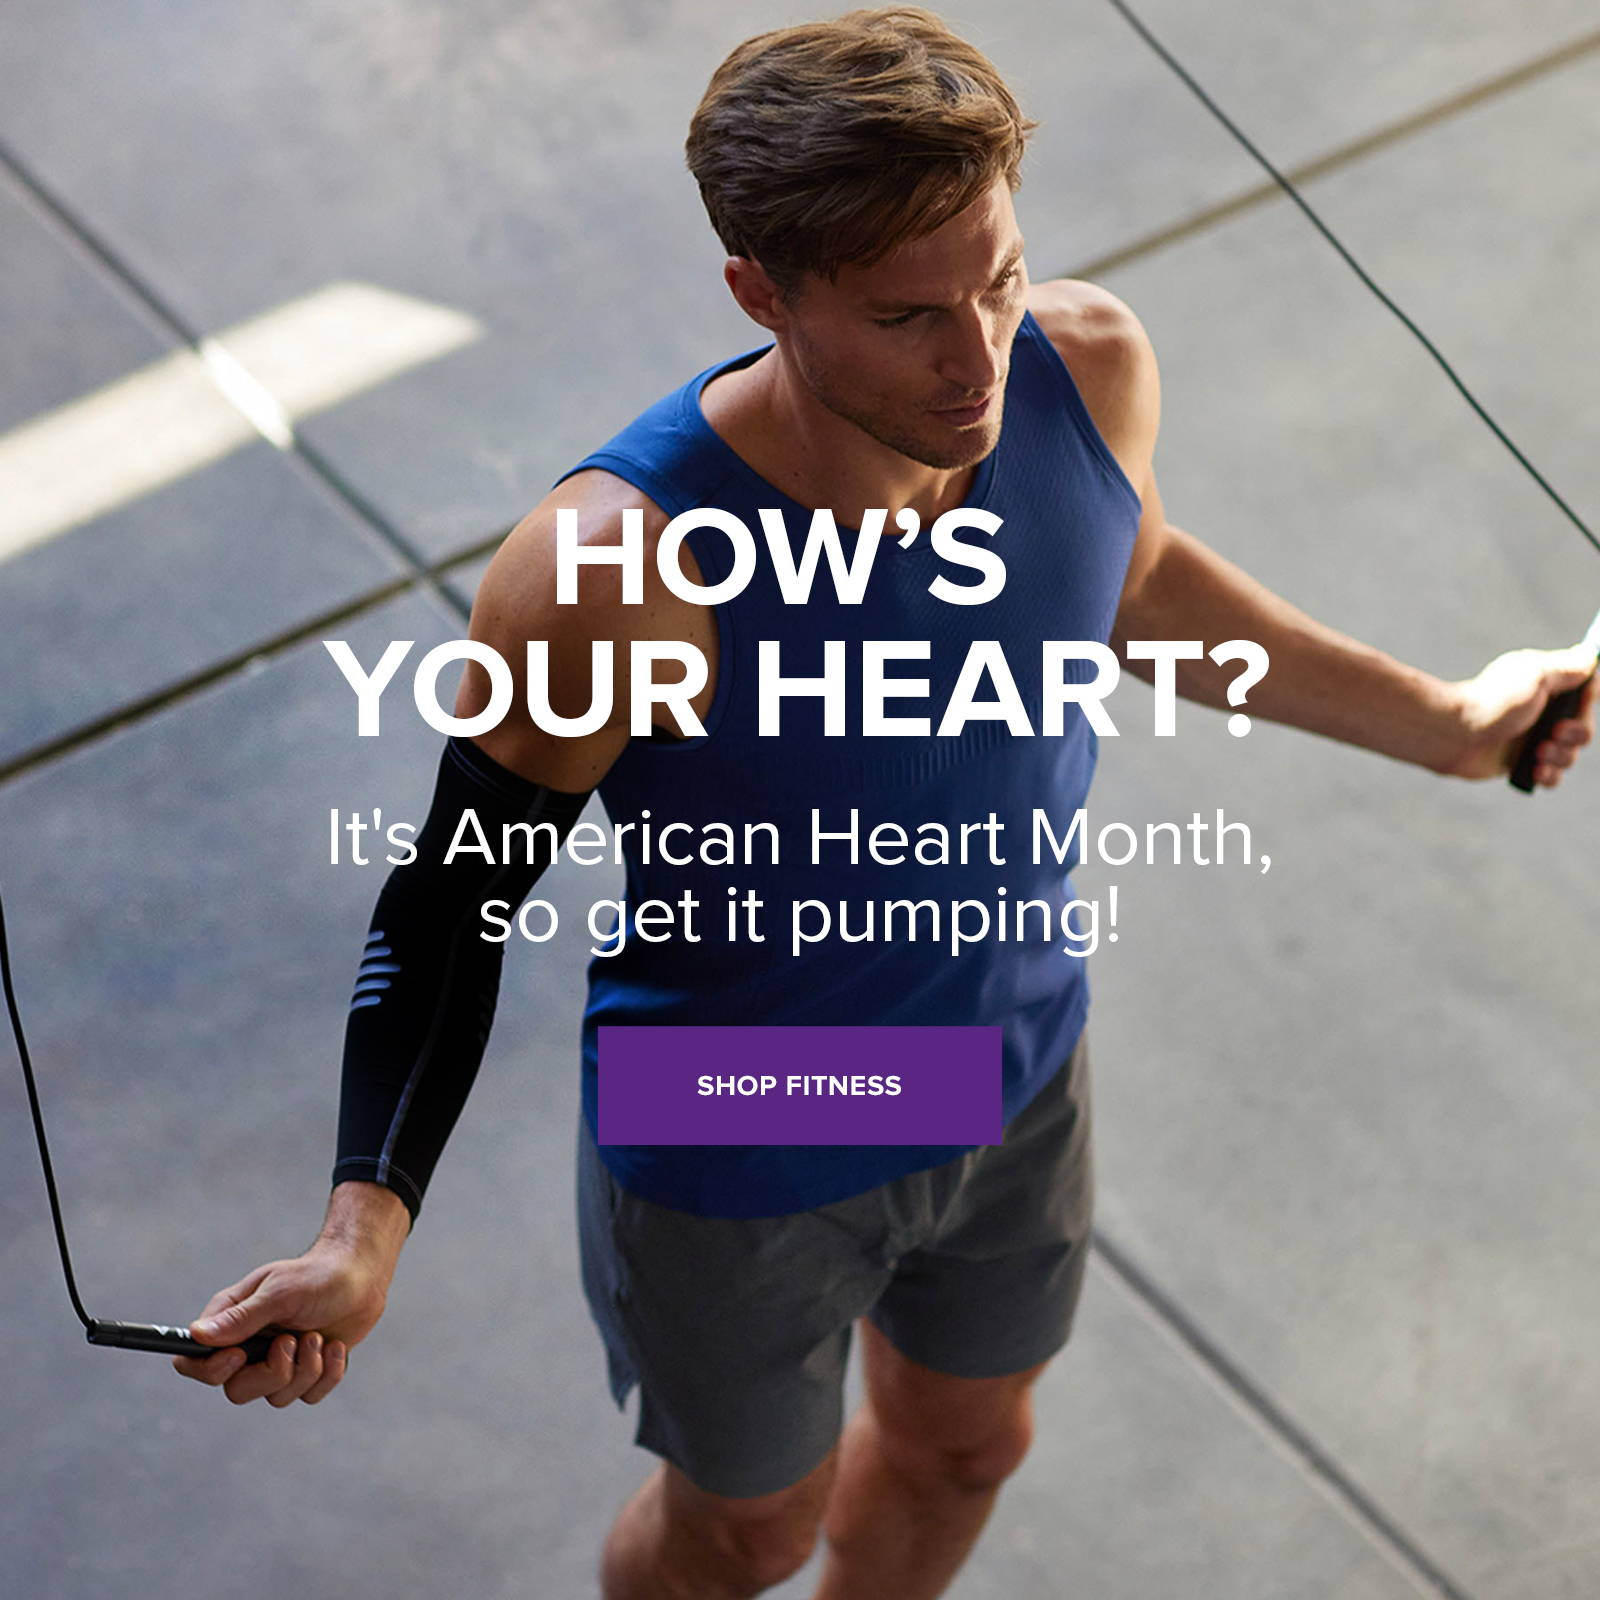 Get your heart pumping during American Heart Month! Shop Fitness!